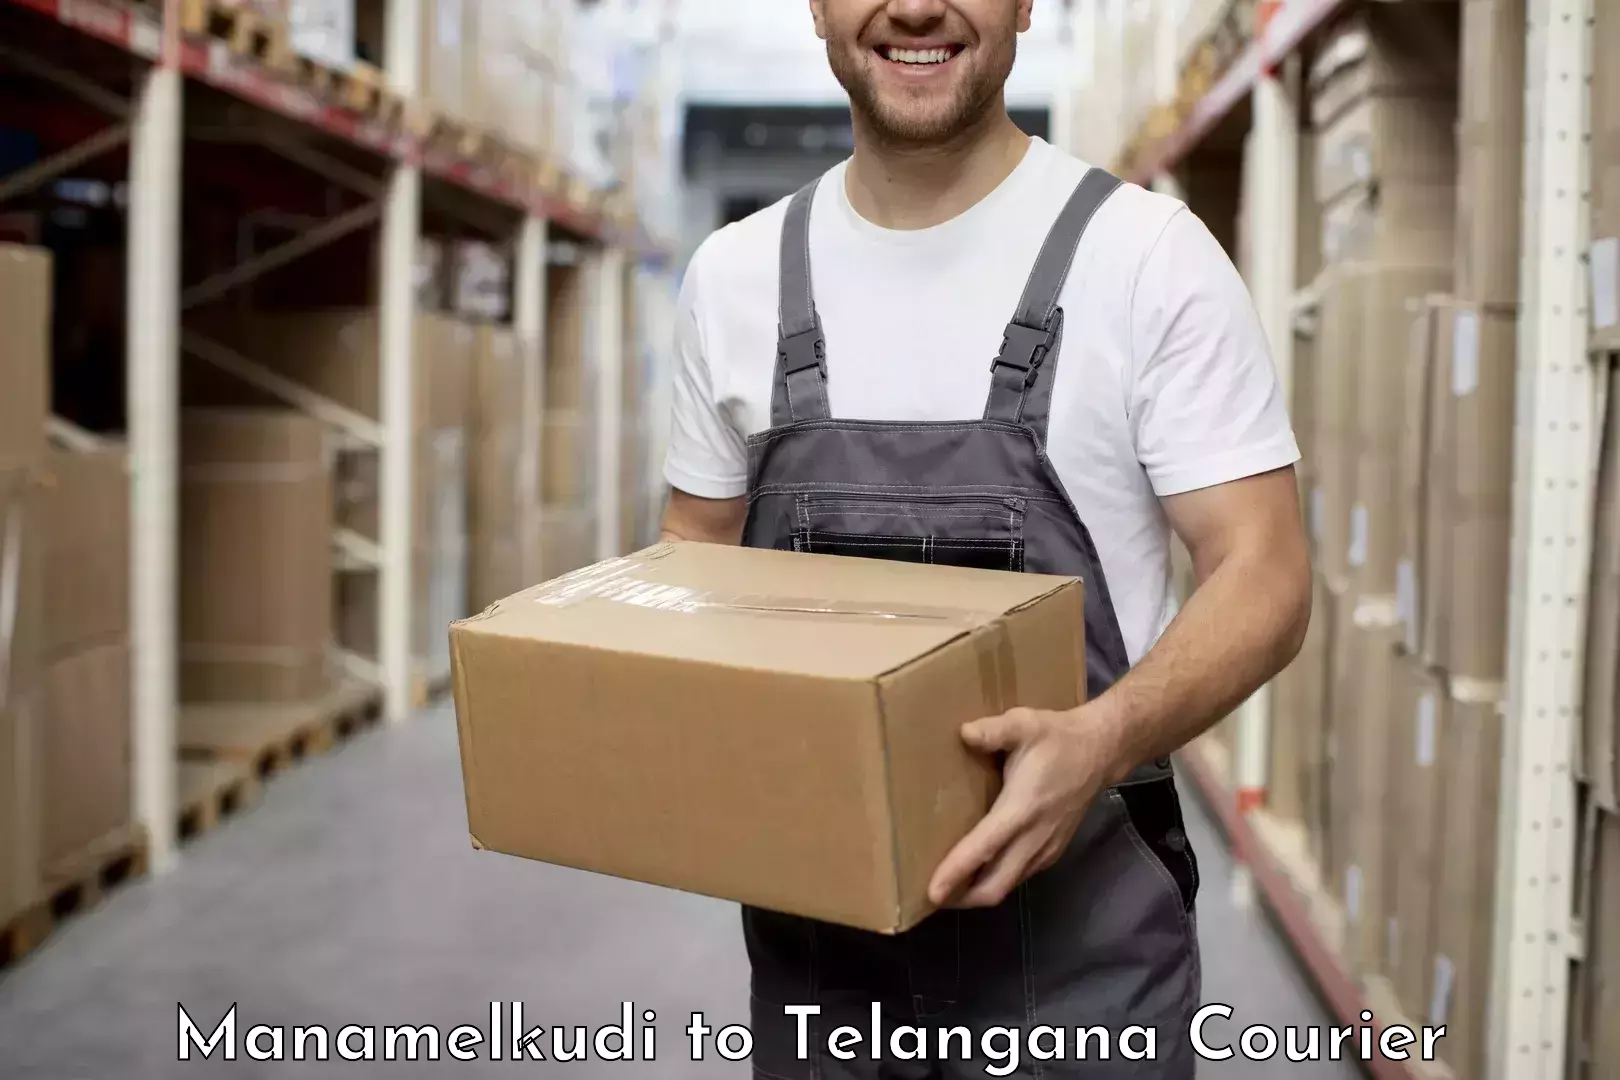 Wholesale parcel delivery in Manamelkudi to Hyderabad